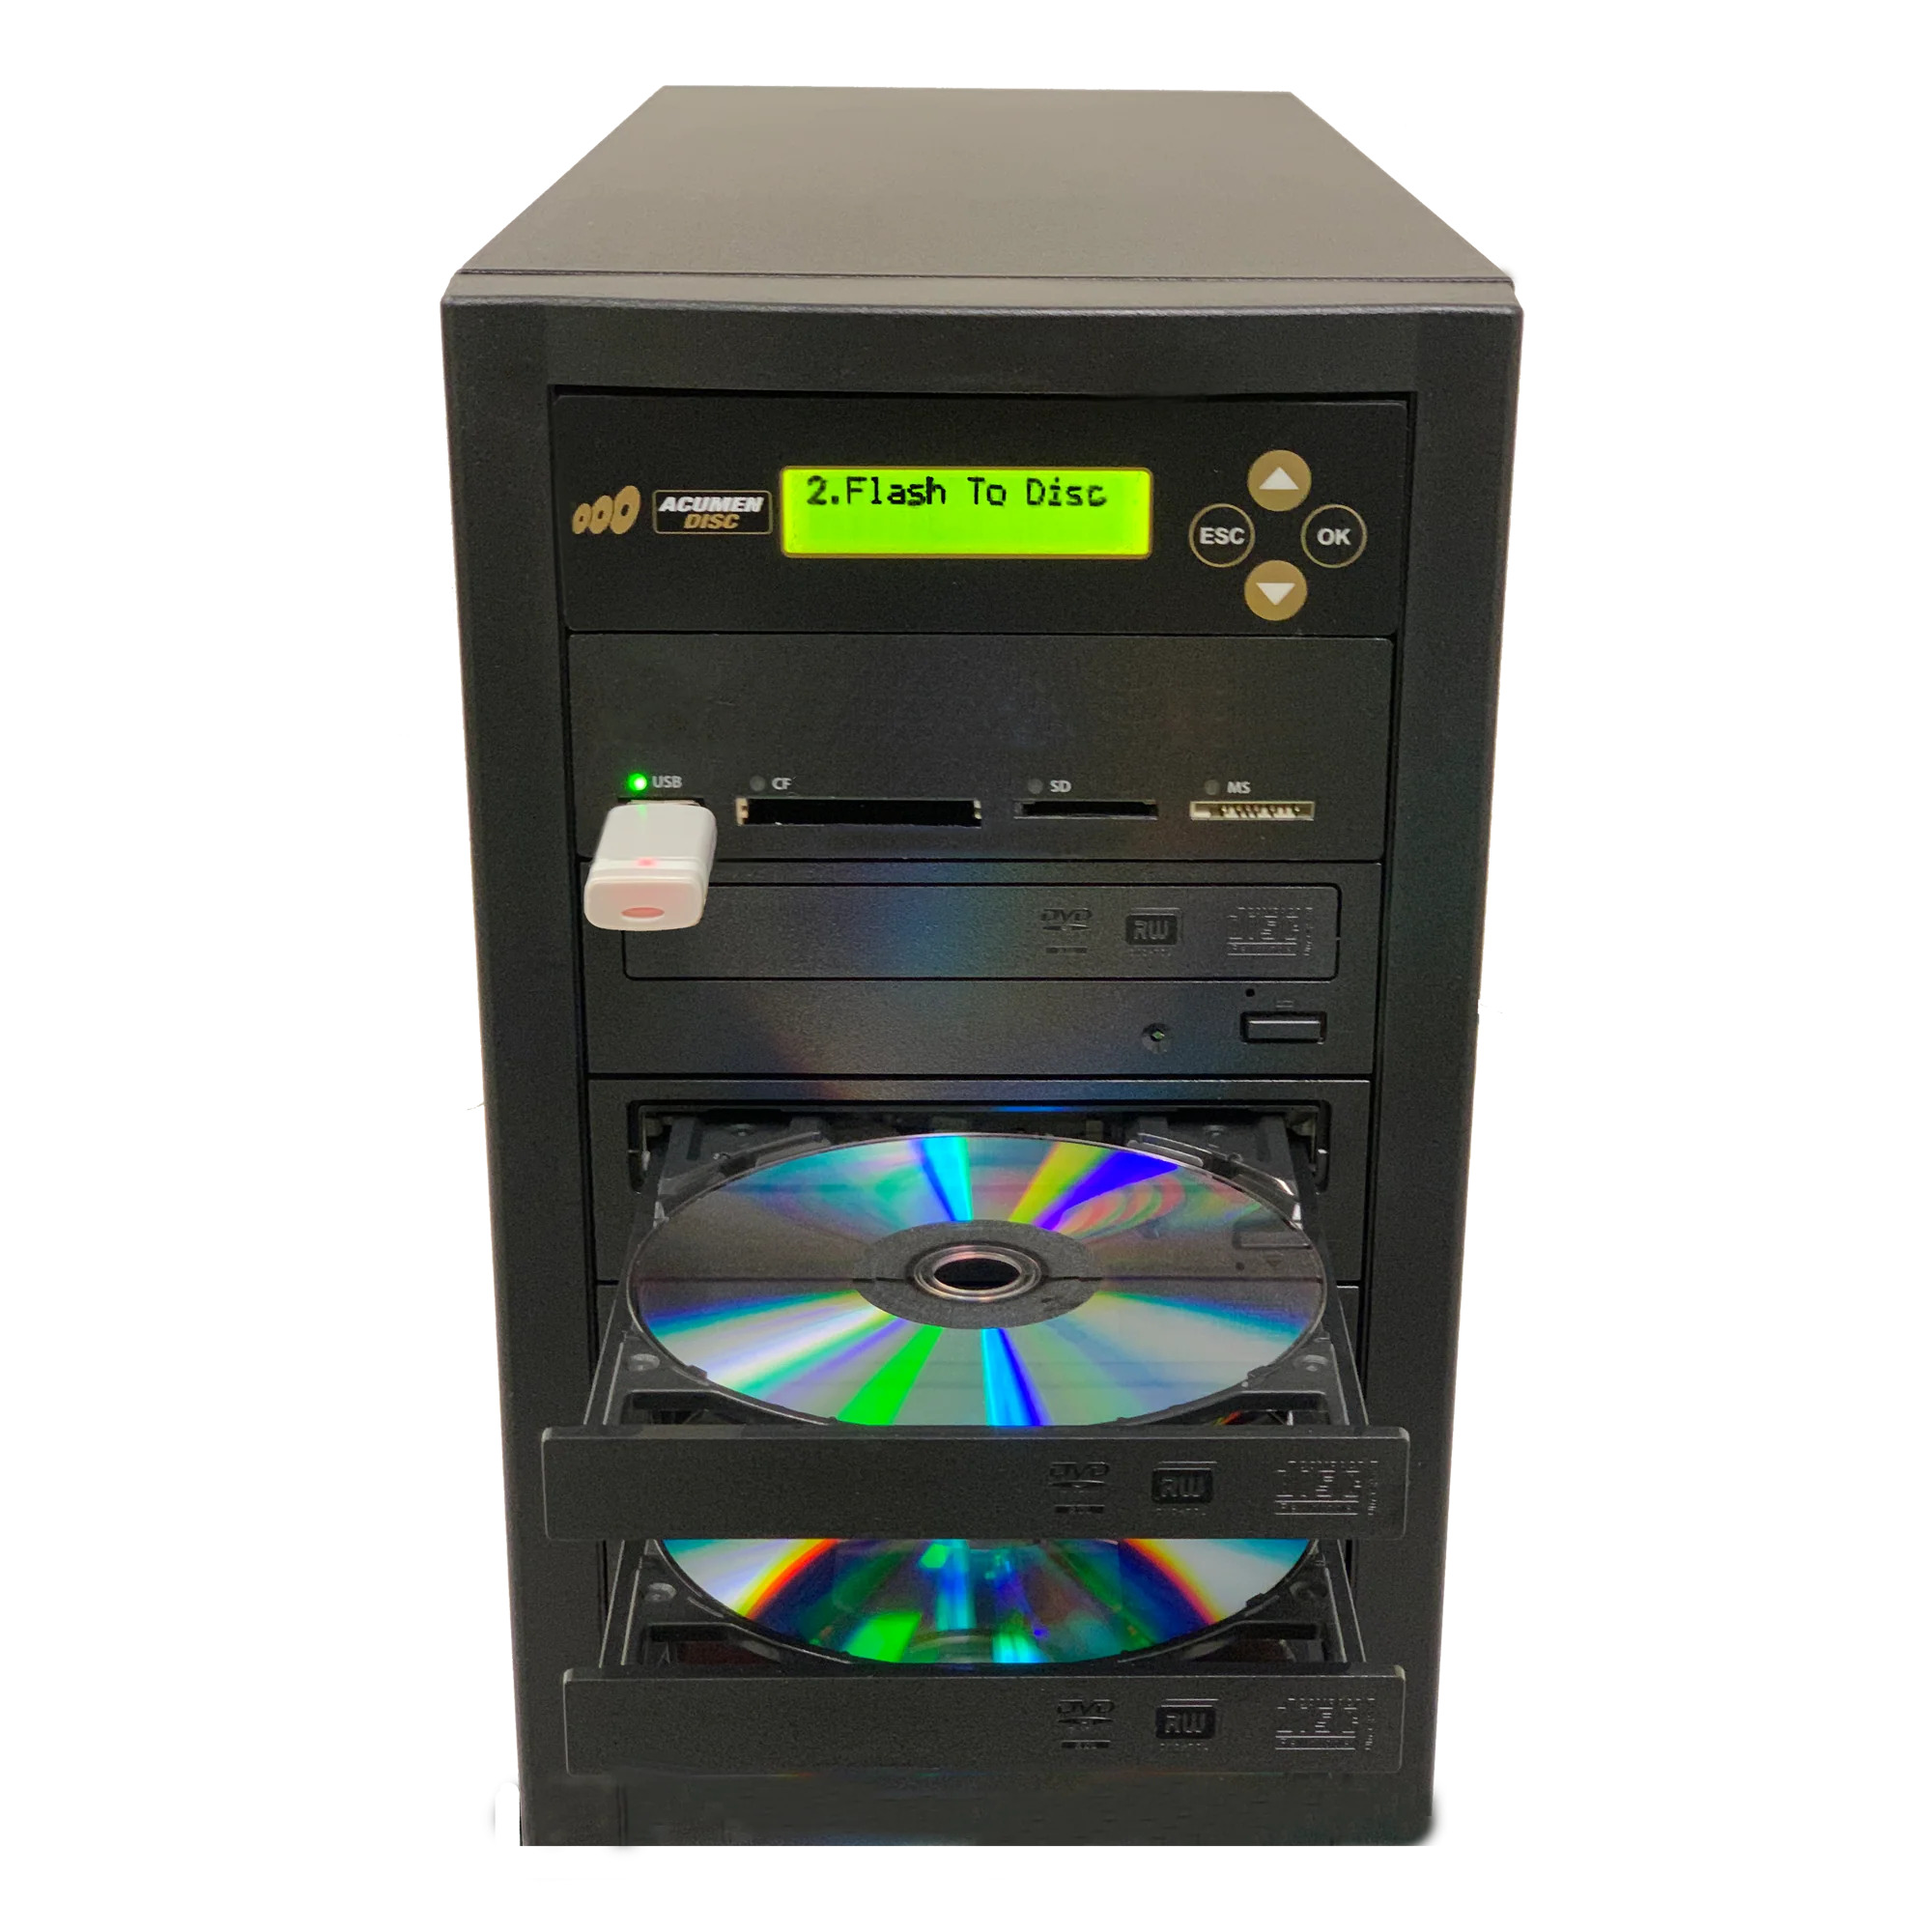 Acumen Disc 1 to 1 DVD Multimedia Backup Duplicator - Flash Media (CF / SD / USB / MMS) to Discs (DVD/CD) Copier Tower System - image 2 of 8